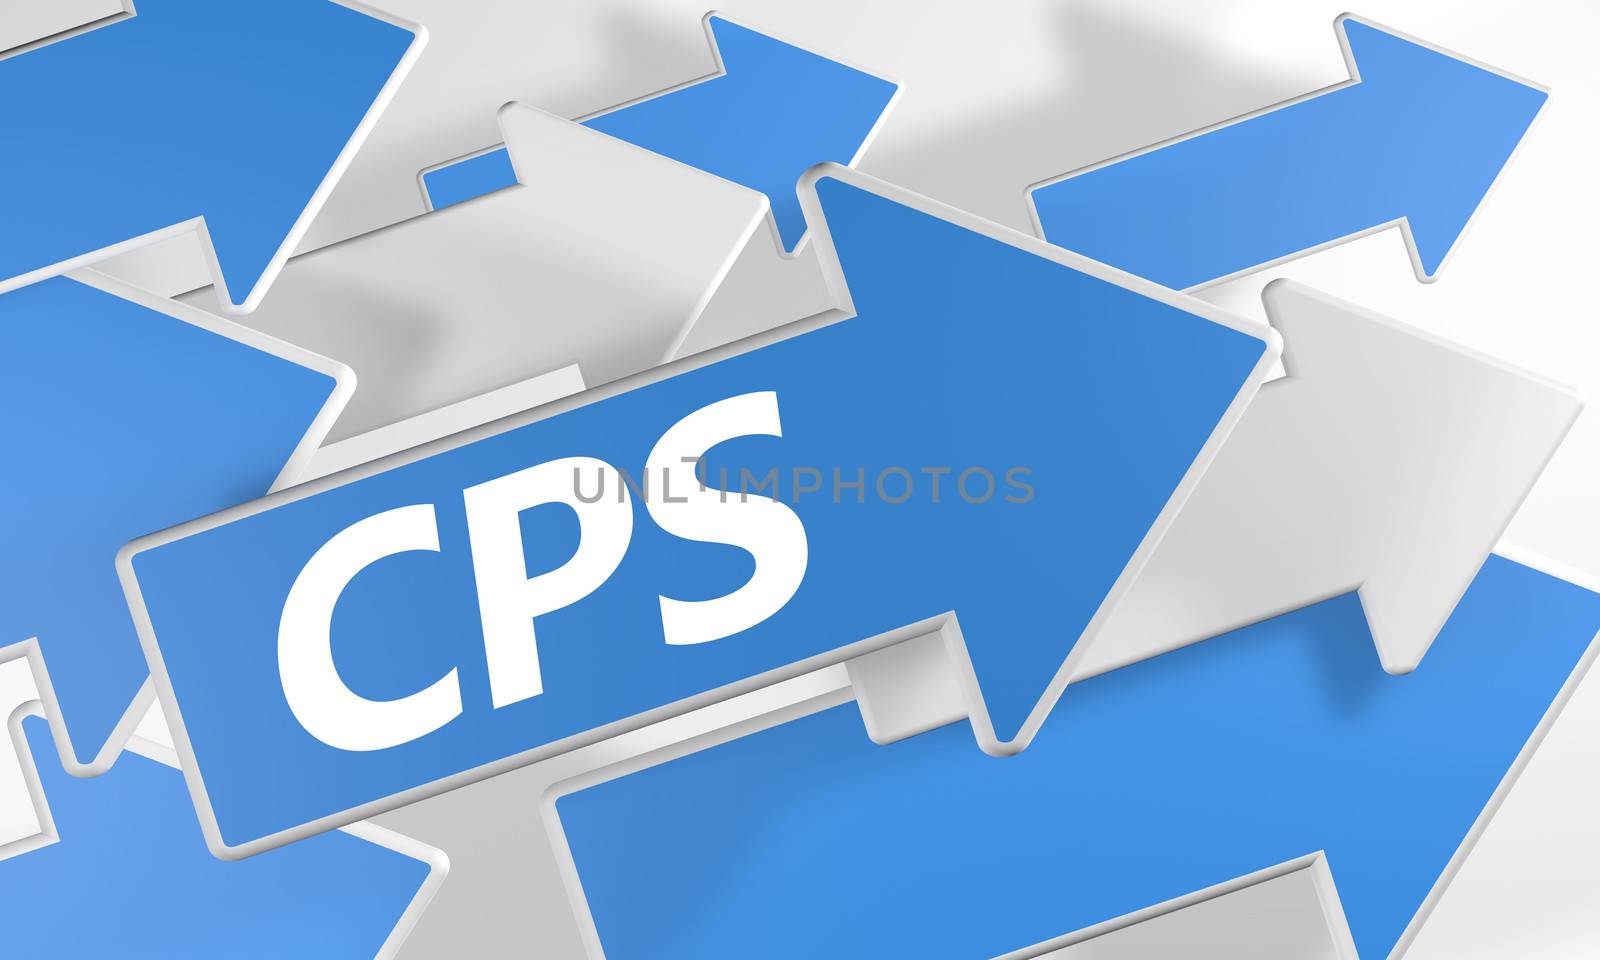 Cost per Sale 3d render concept with blue and white arrows flying over a white background.